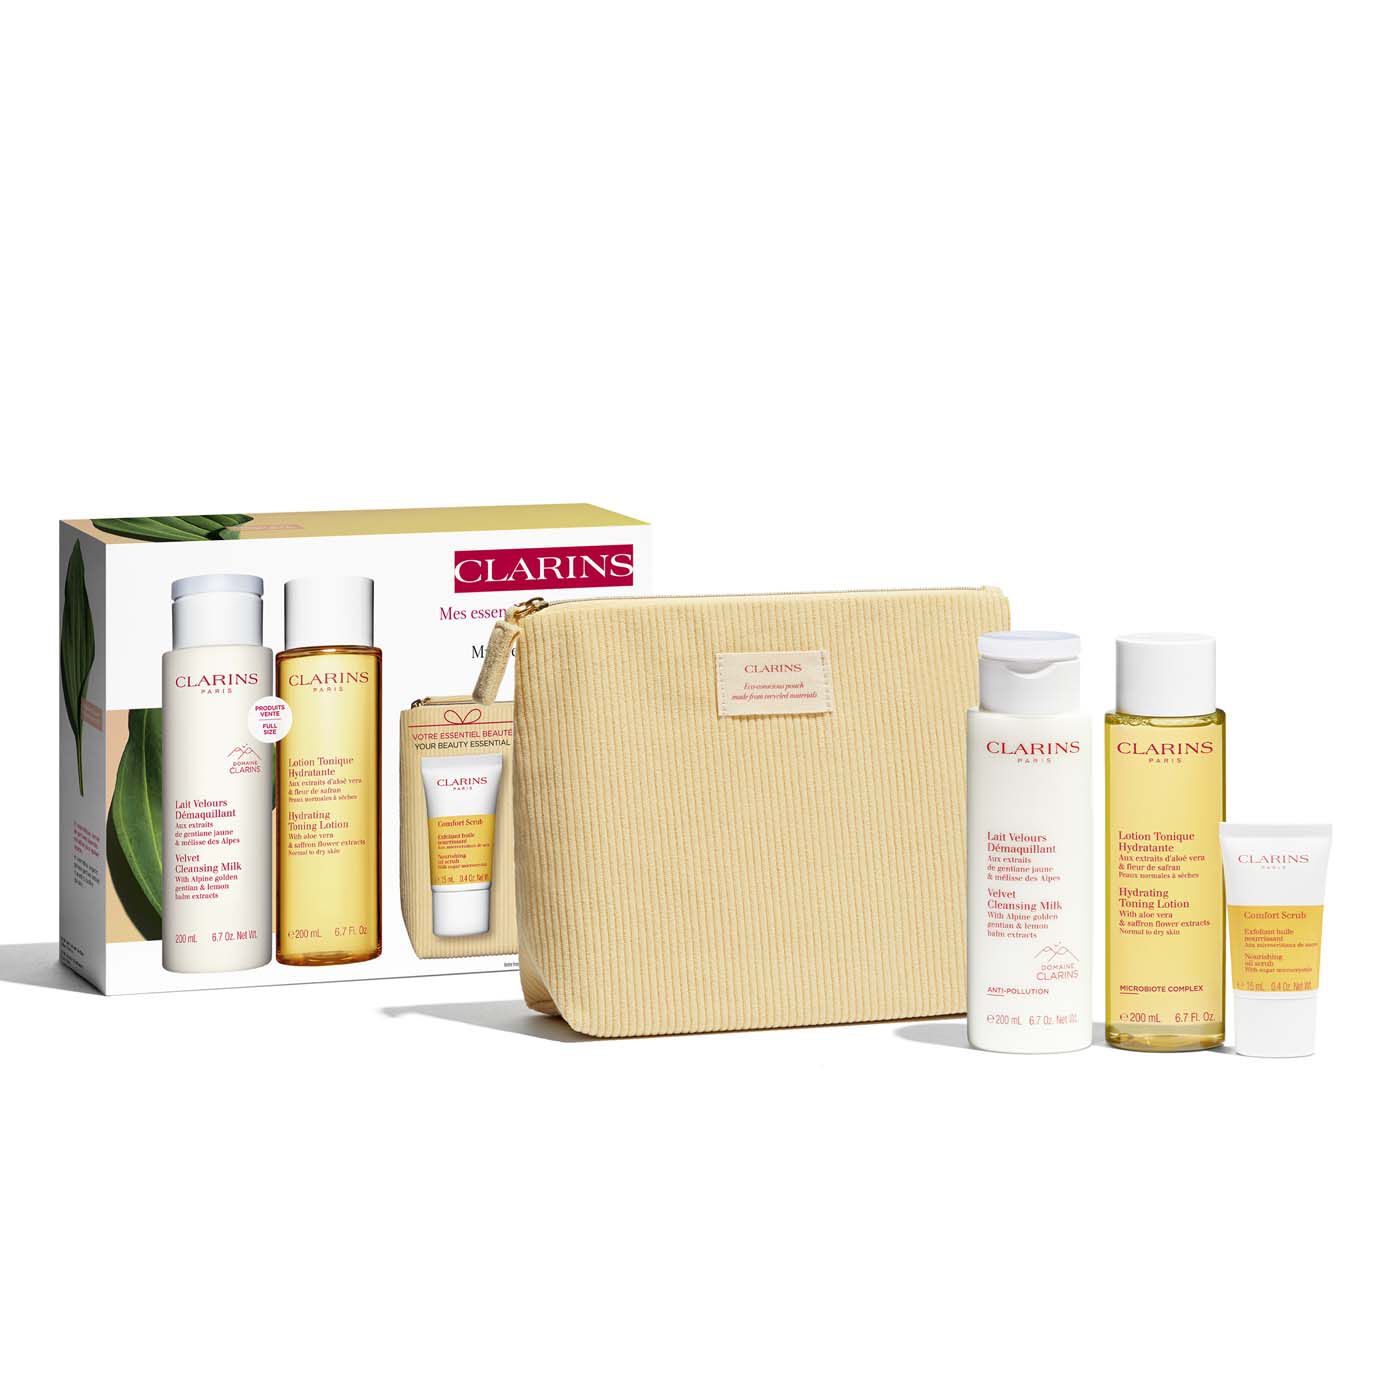 Buy CLARINS Anti-Aging Double Serum Box - 3 Products +